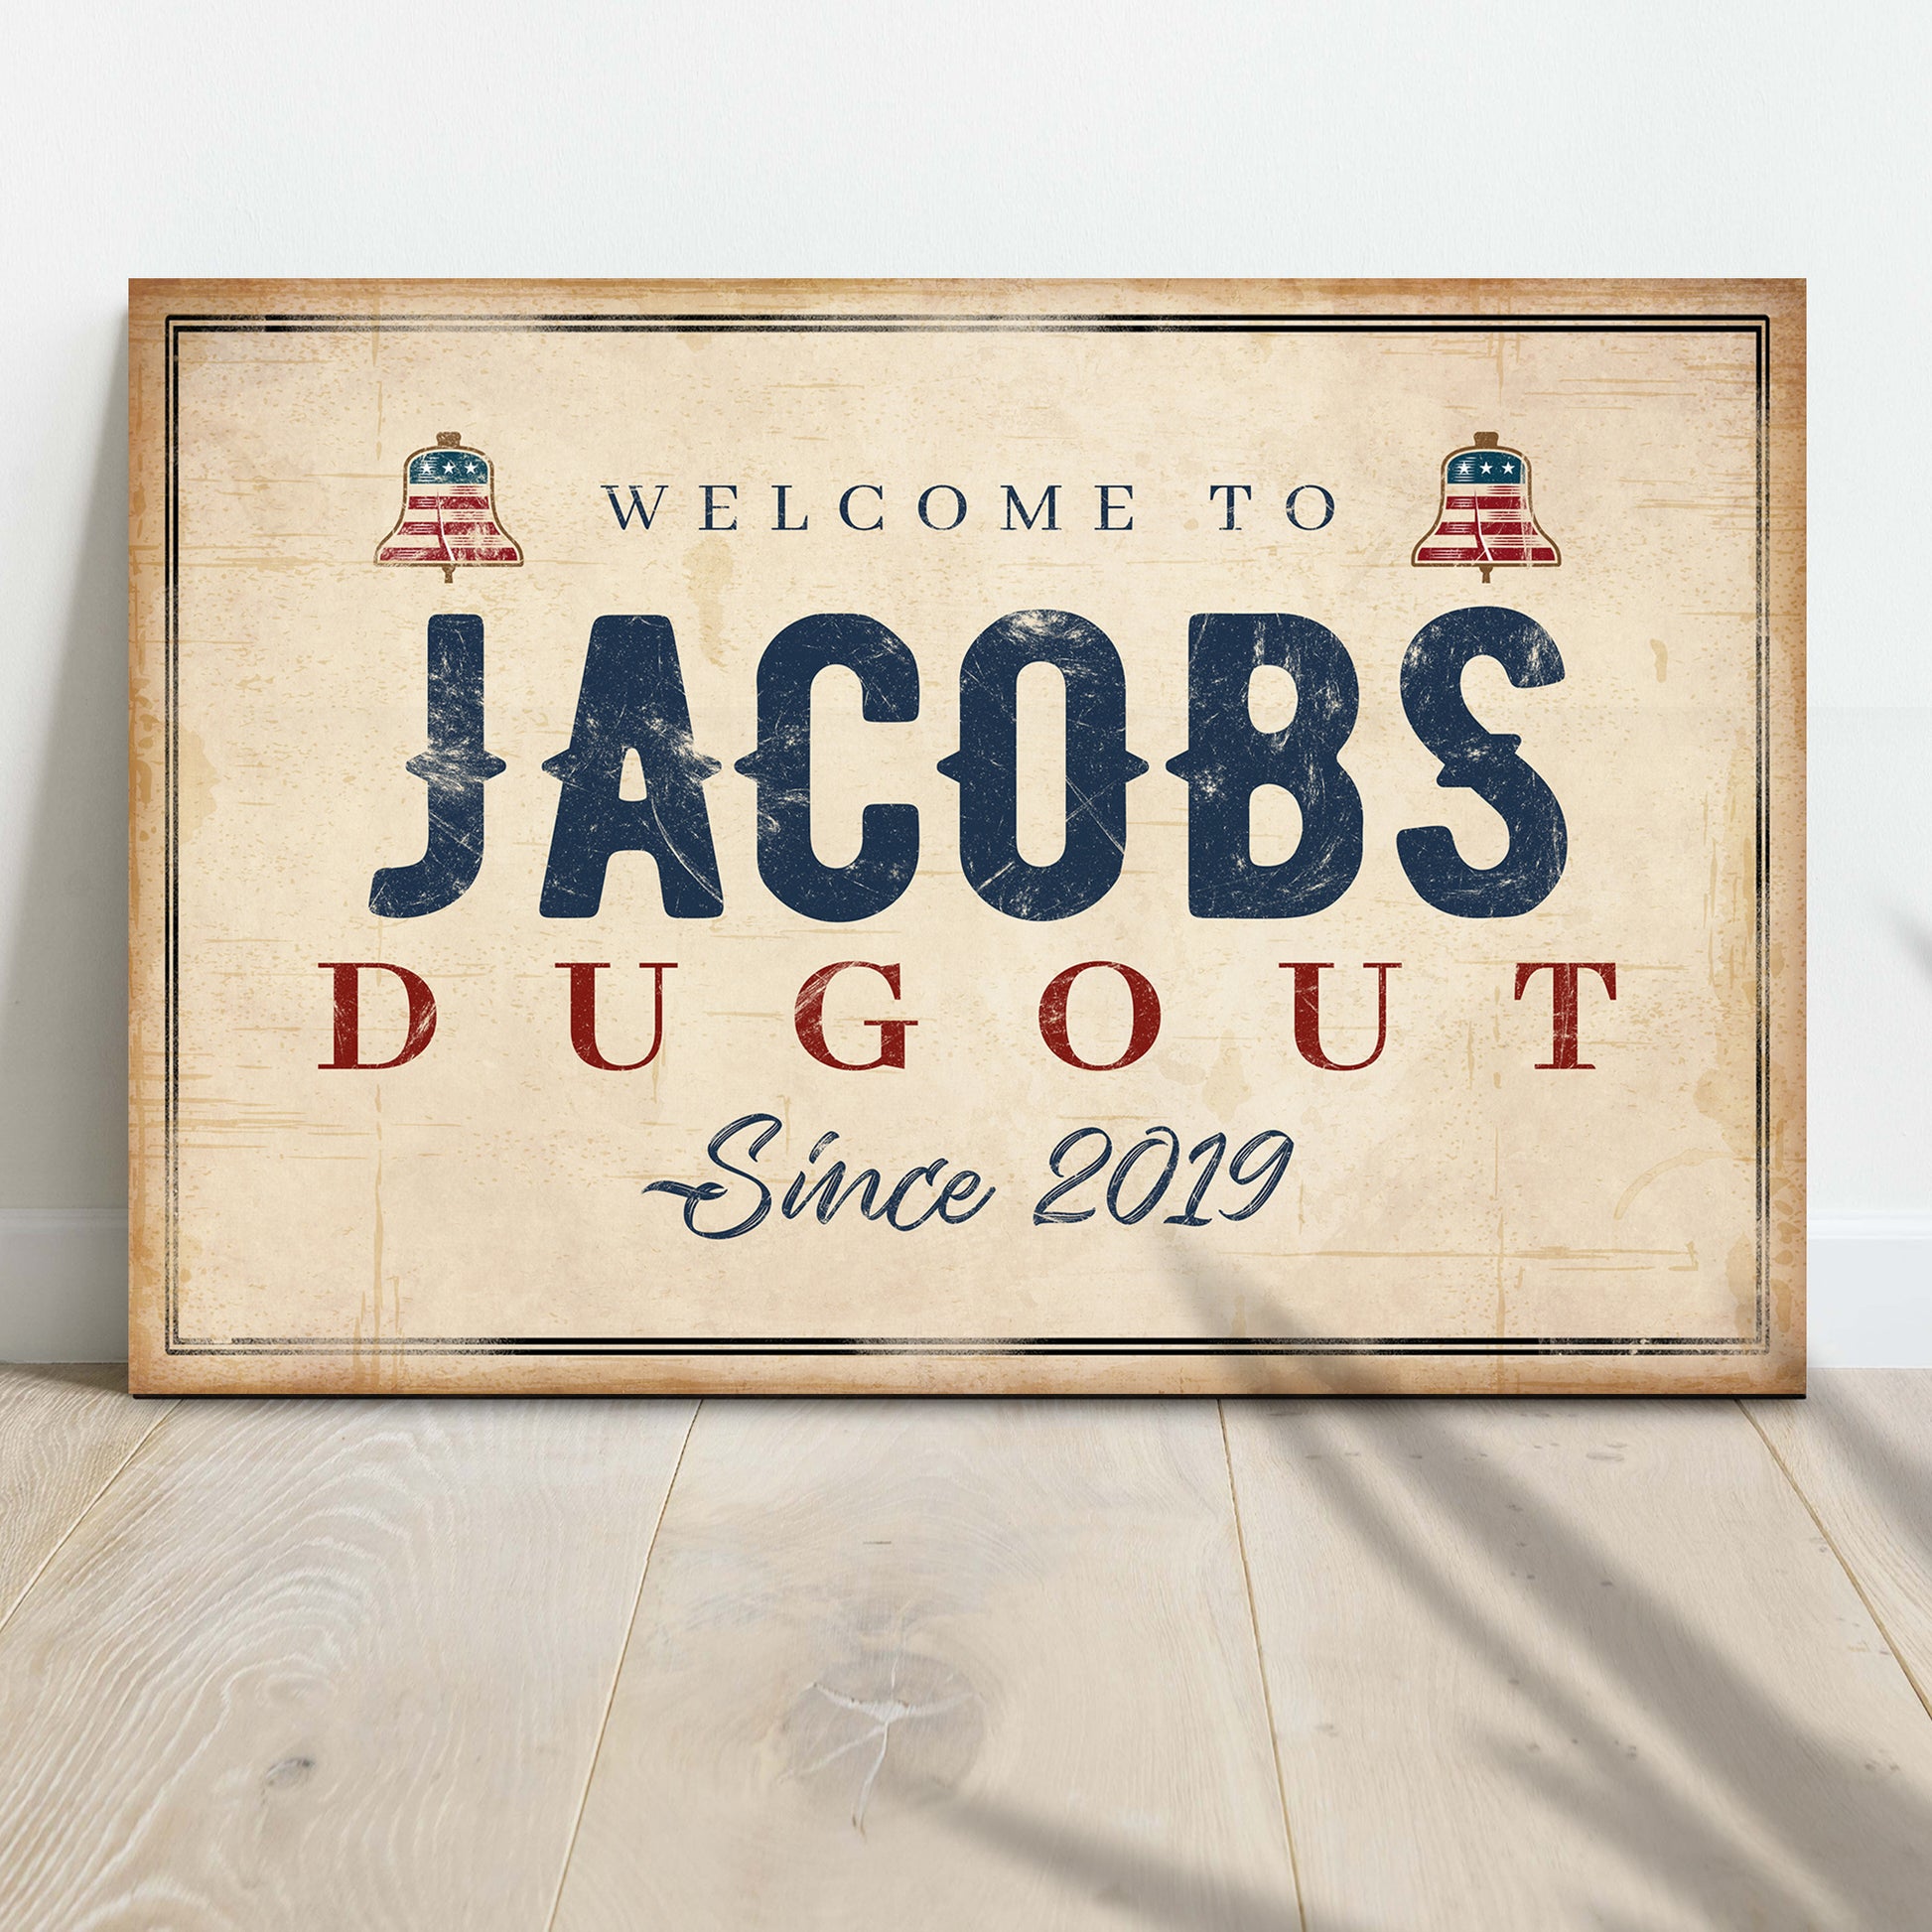 Kids Dugout Sign - Image by Tailored Canvases